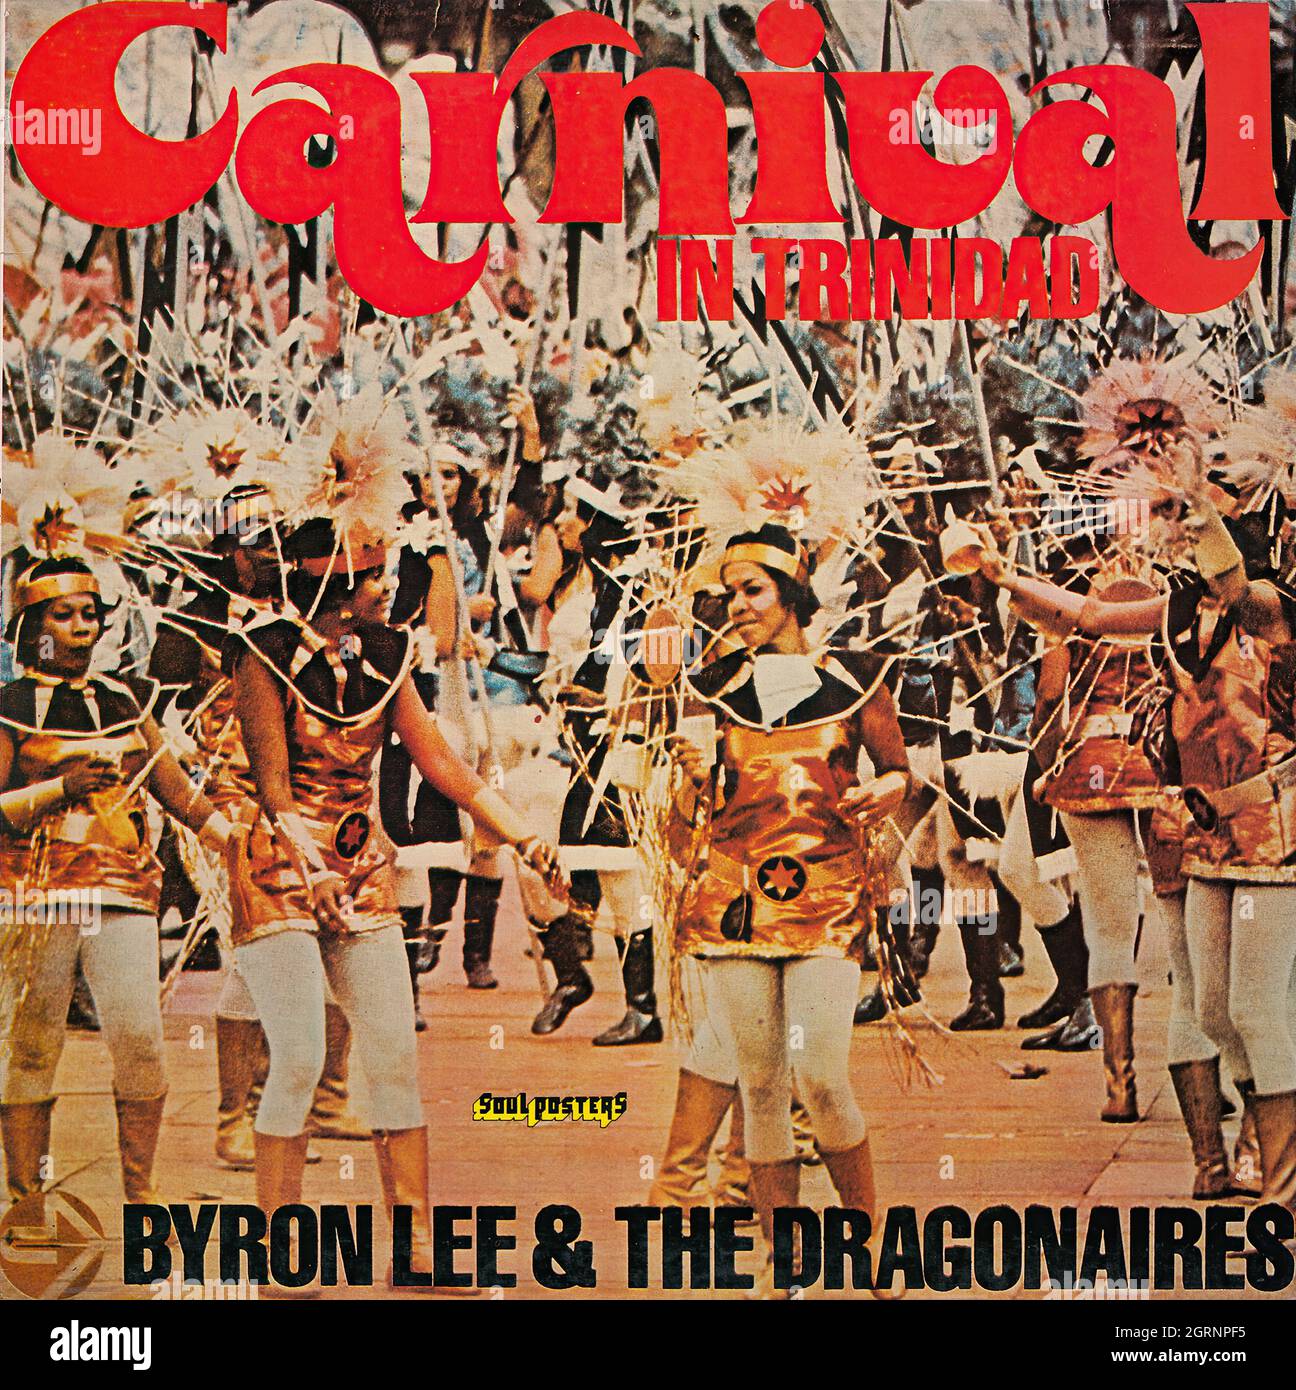 Byron Lee & The Dragonaires - Carnival in Trinidad - Vintage Vinyl Record  Cover Stock Photo - Alamy